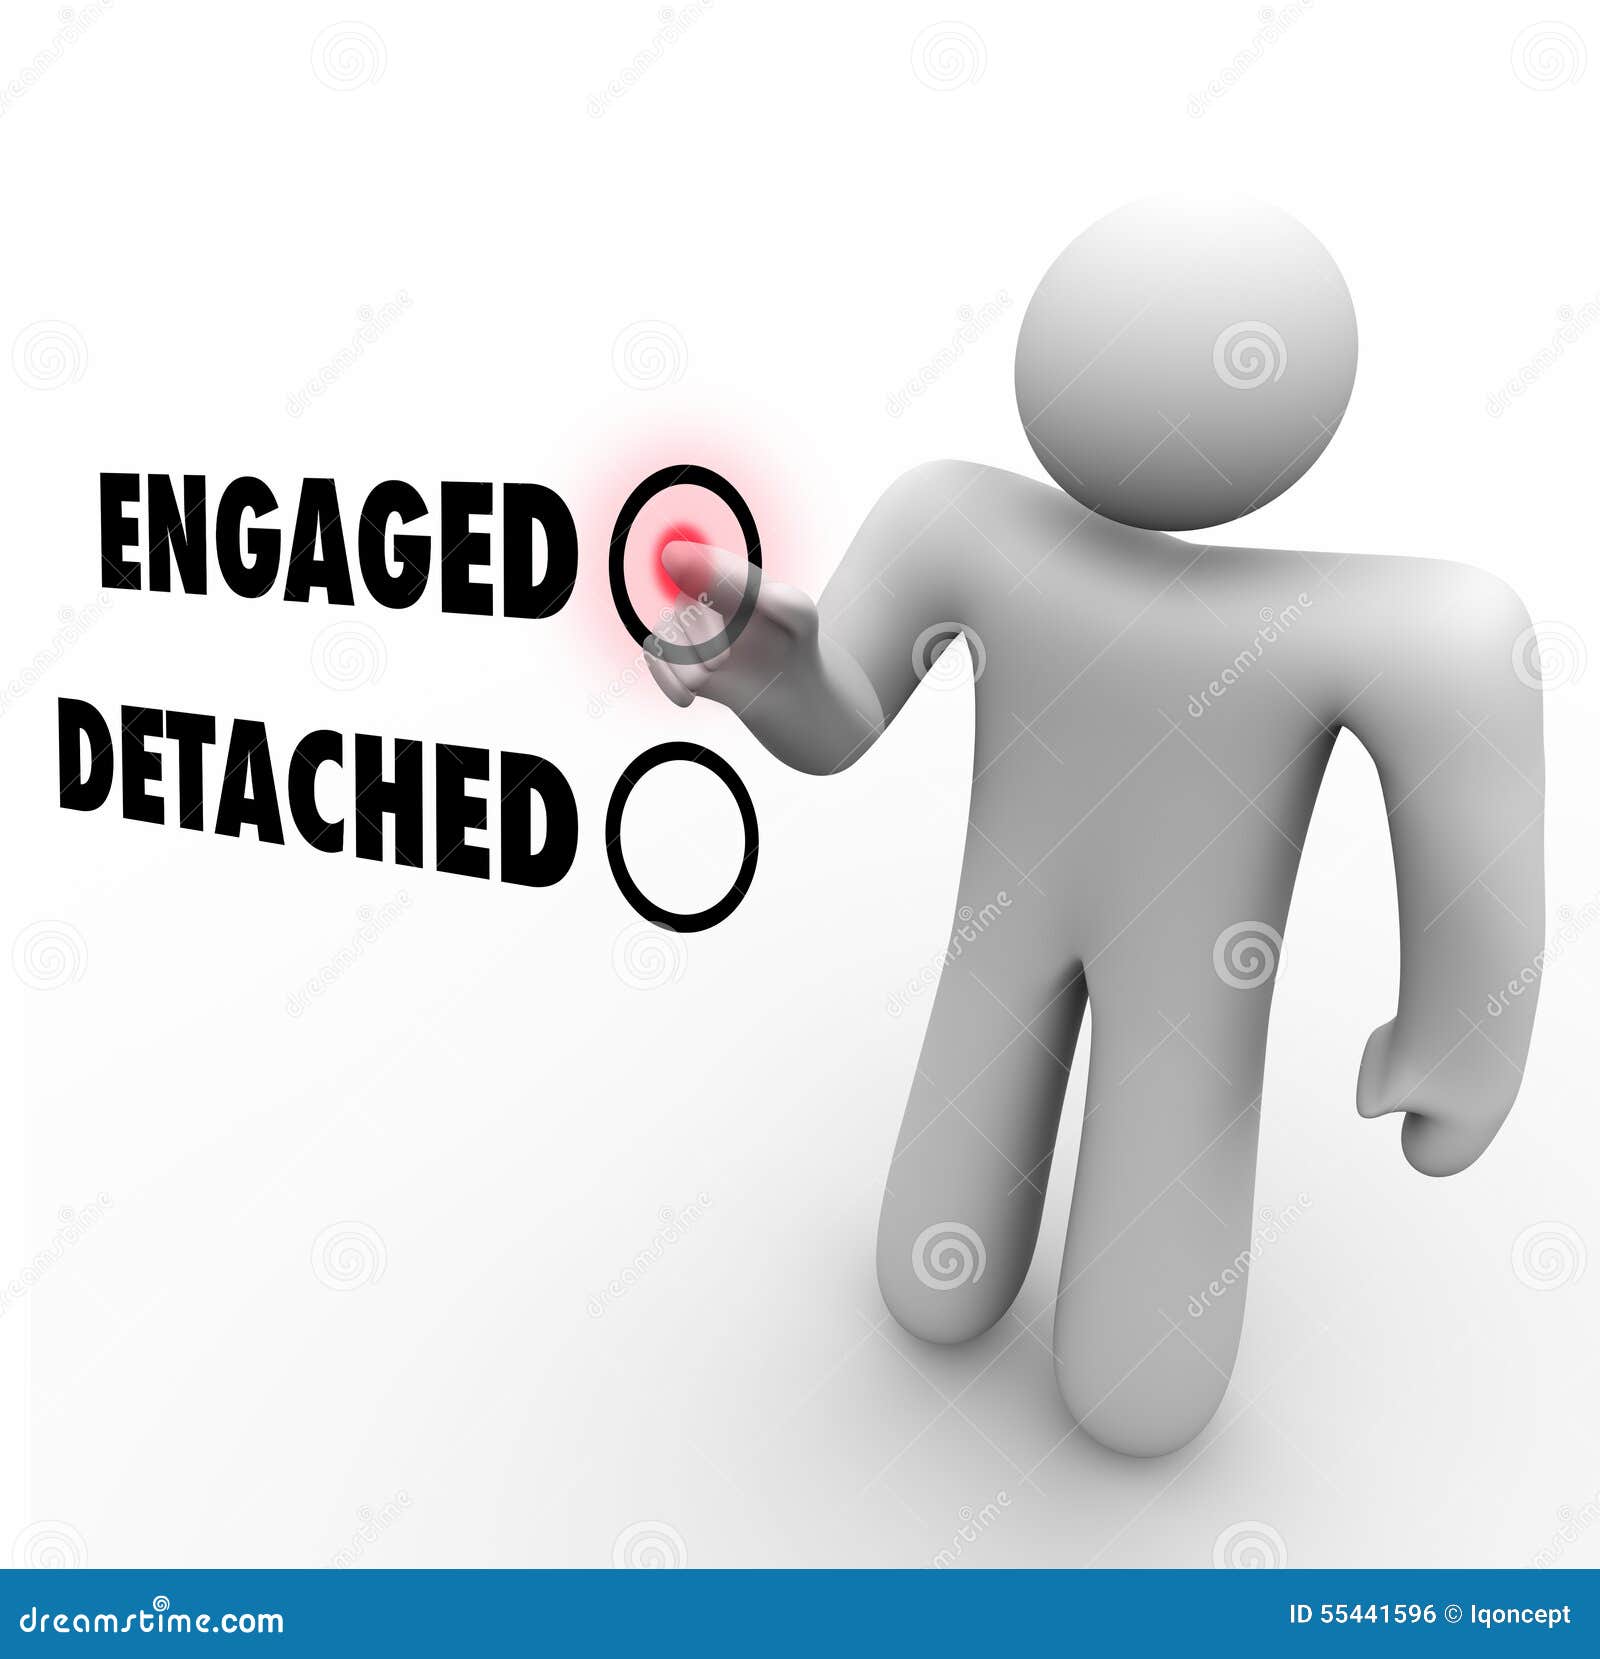 engaged vs detached person choosing interaction attitude